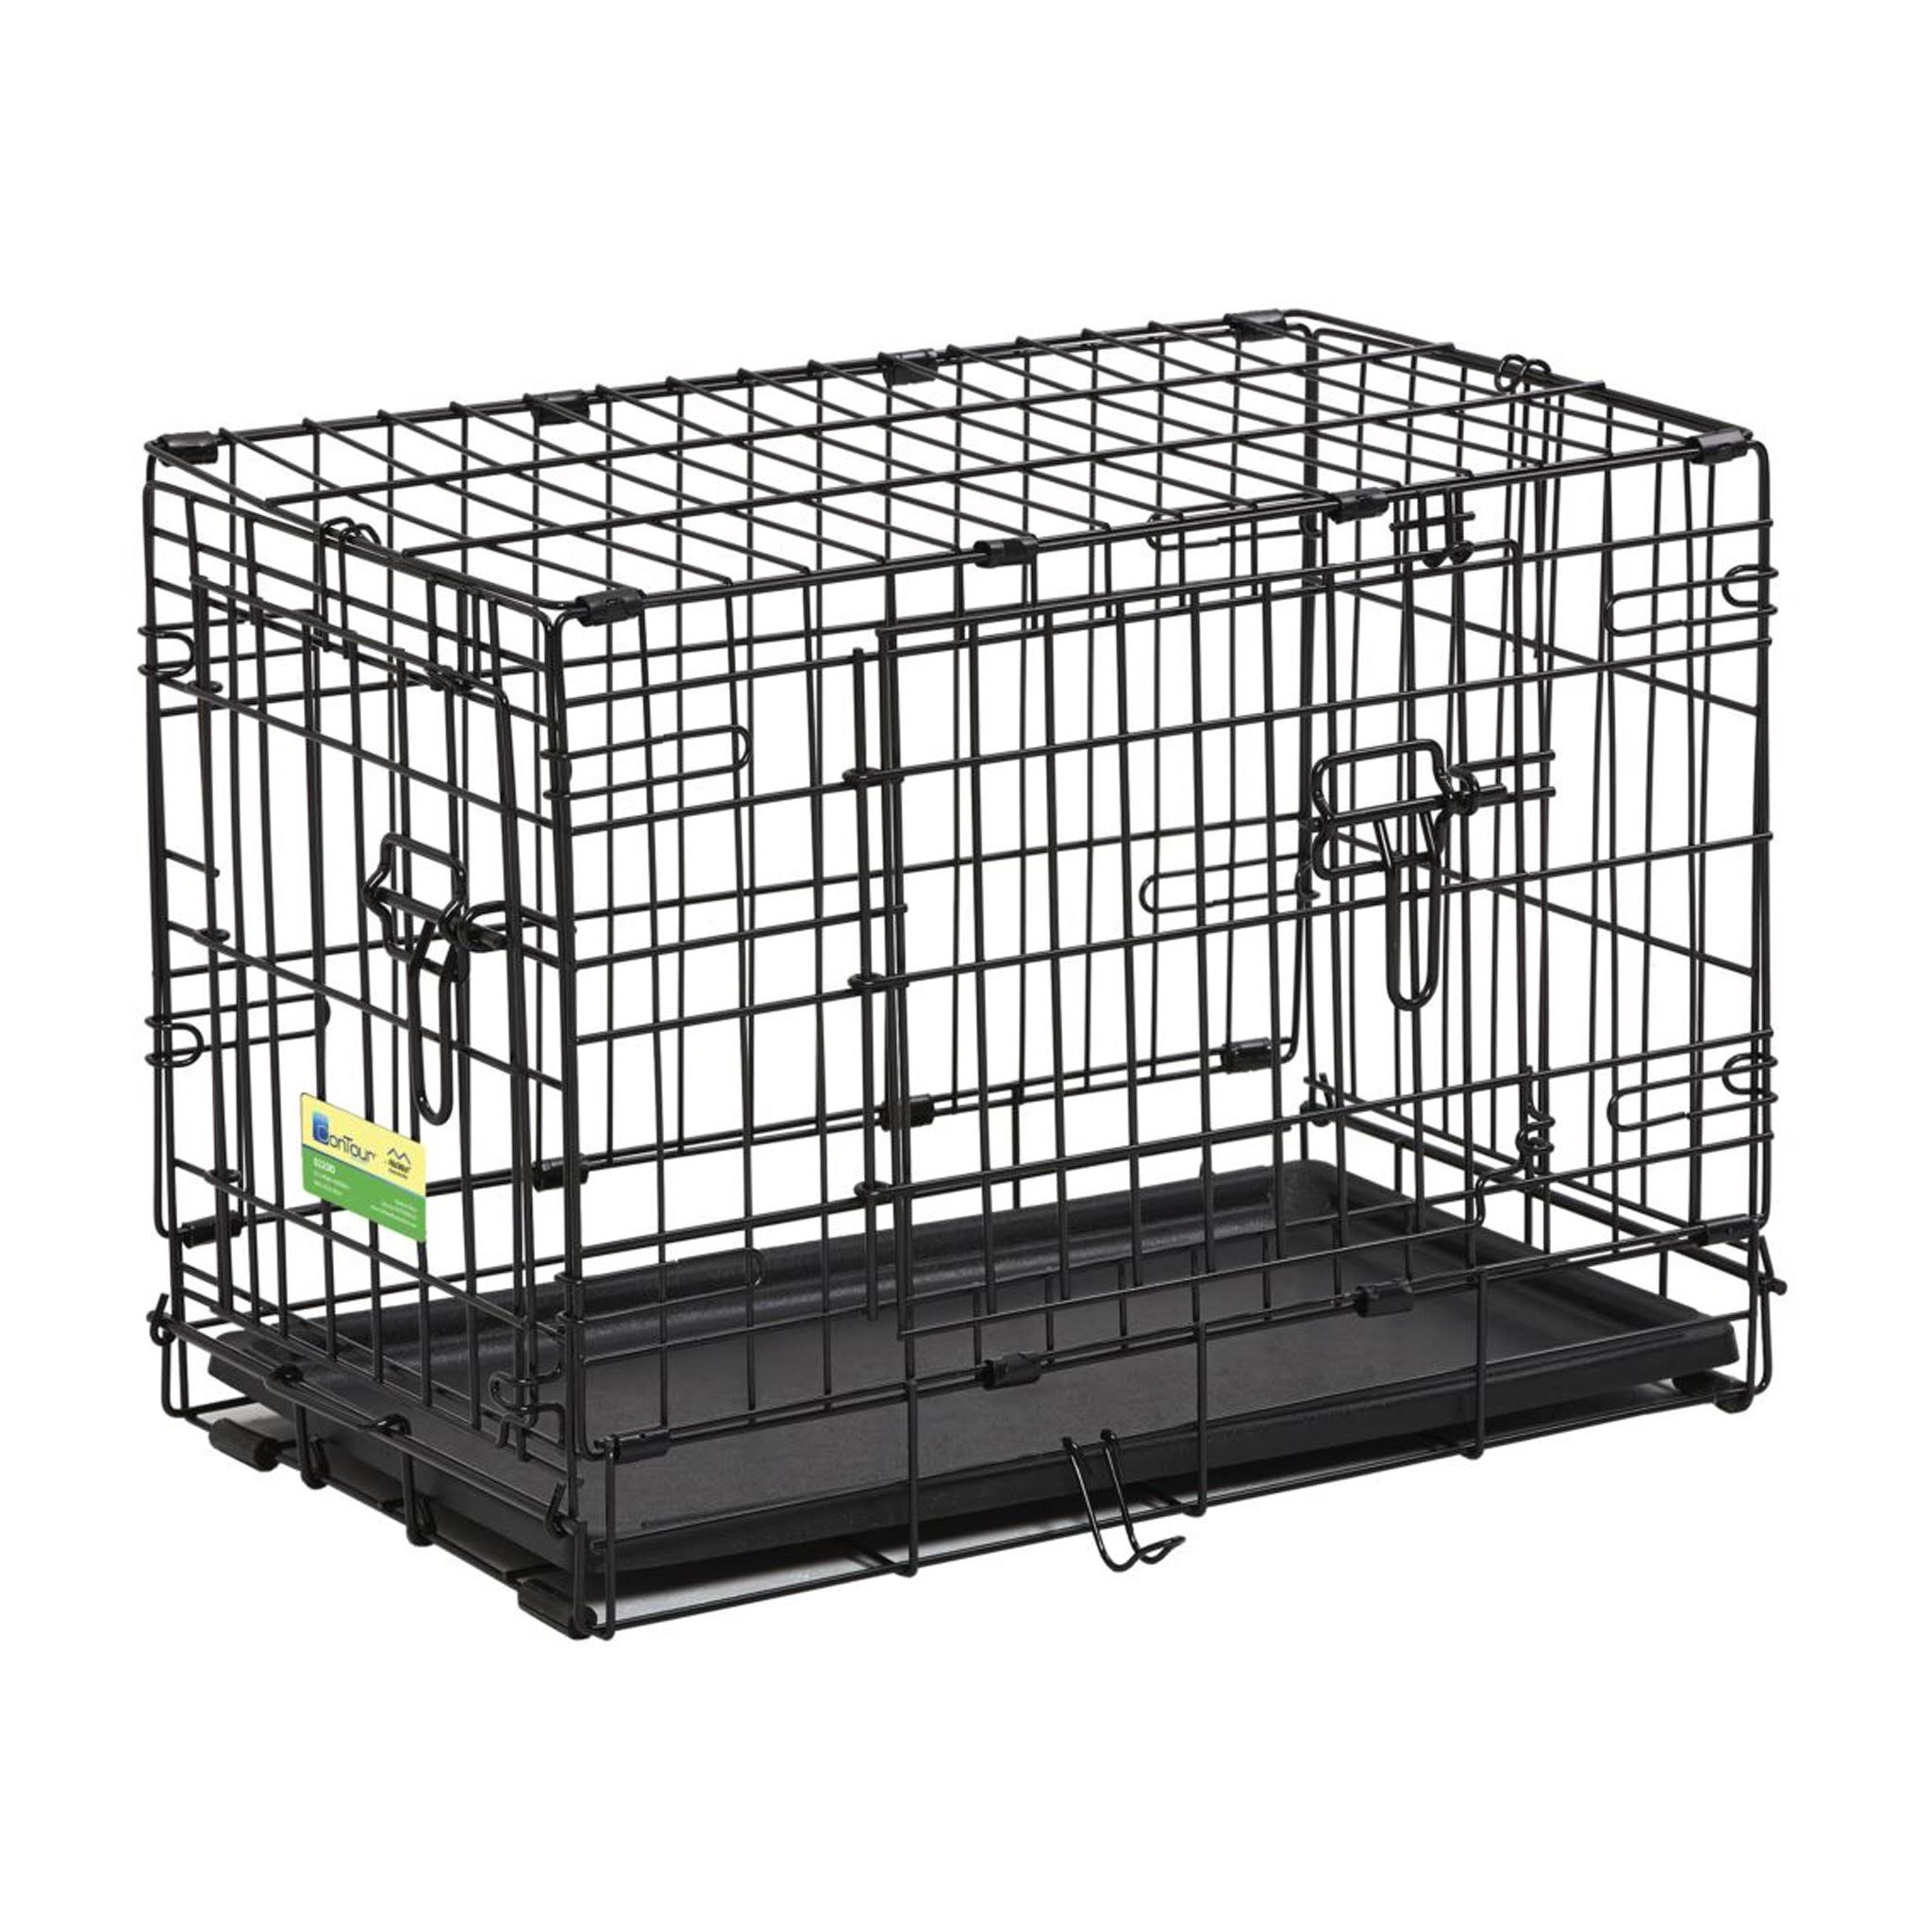 Double door dog crate with divider and pan | ConTour